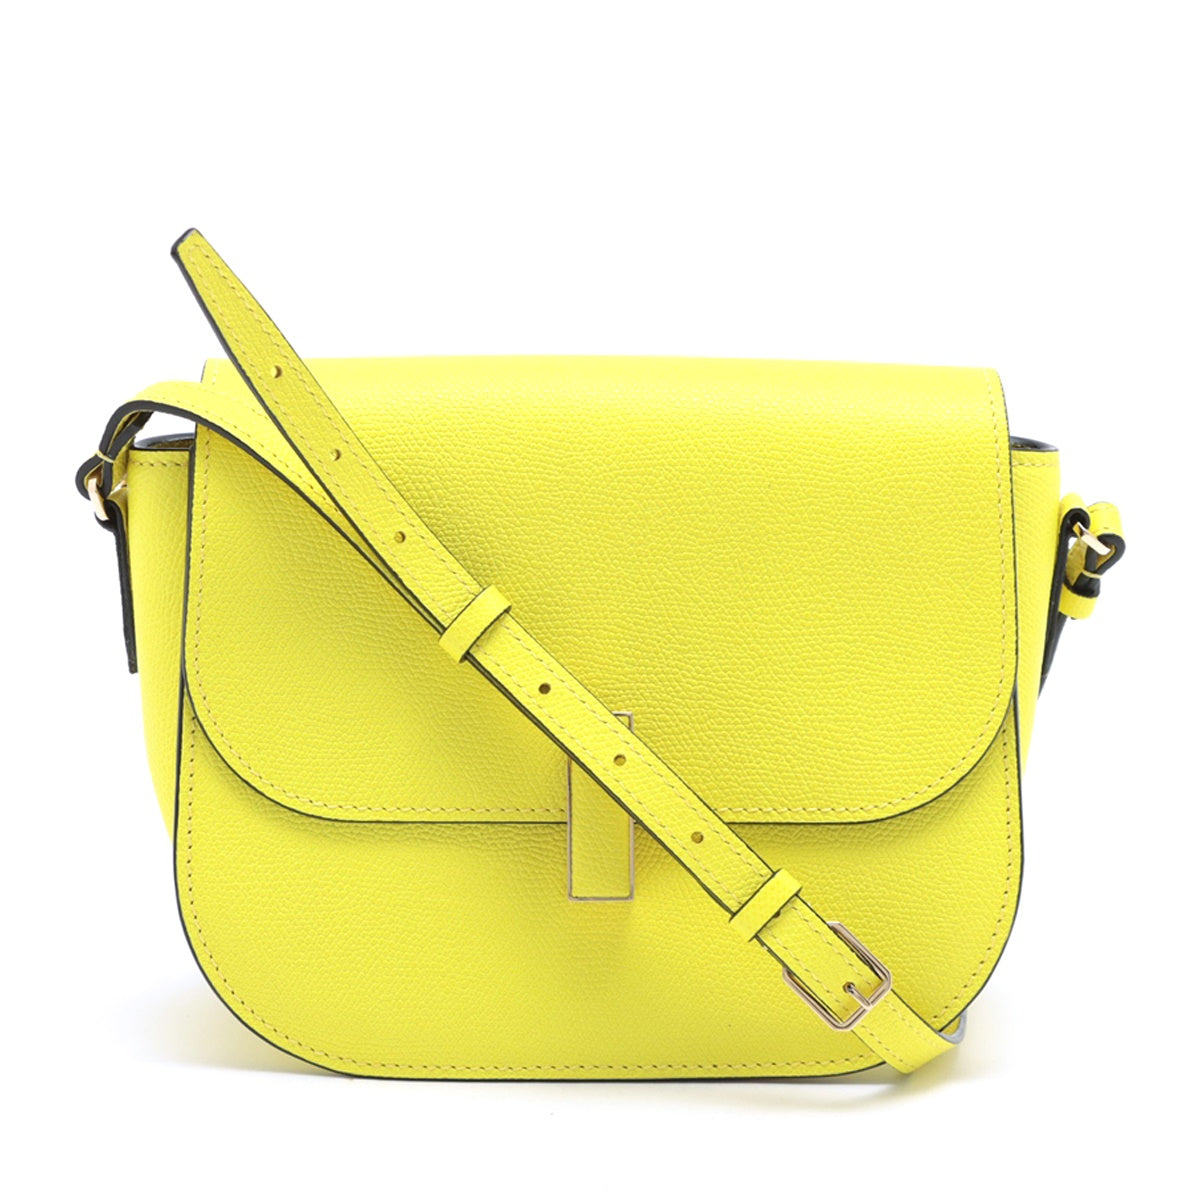 Valextra Iside Leather Shoulder bag Yellow There are loose metal fittings